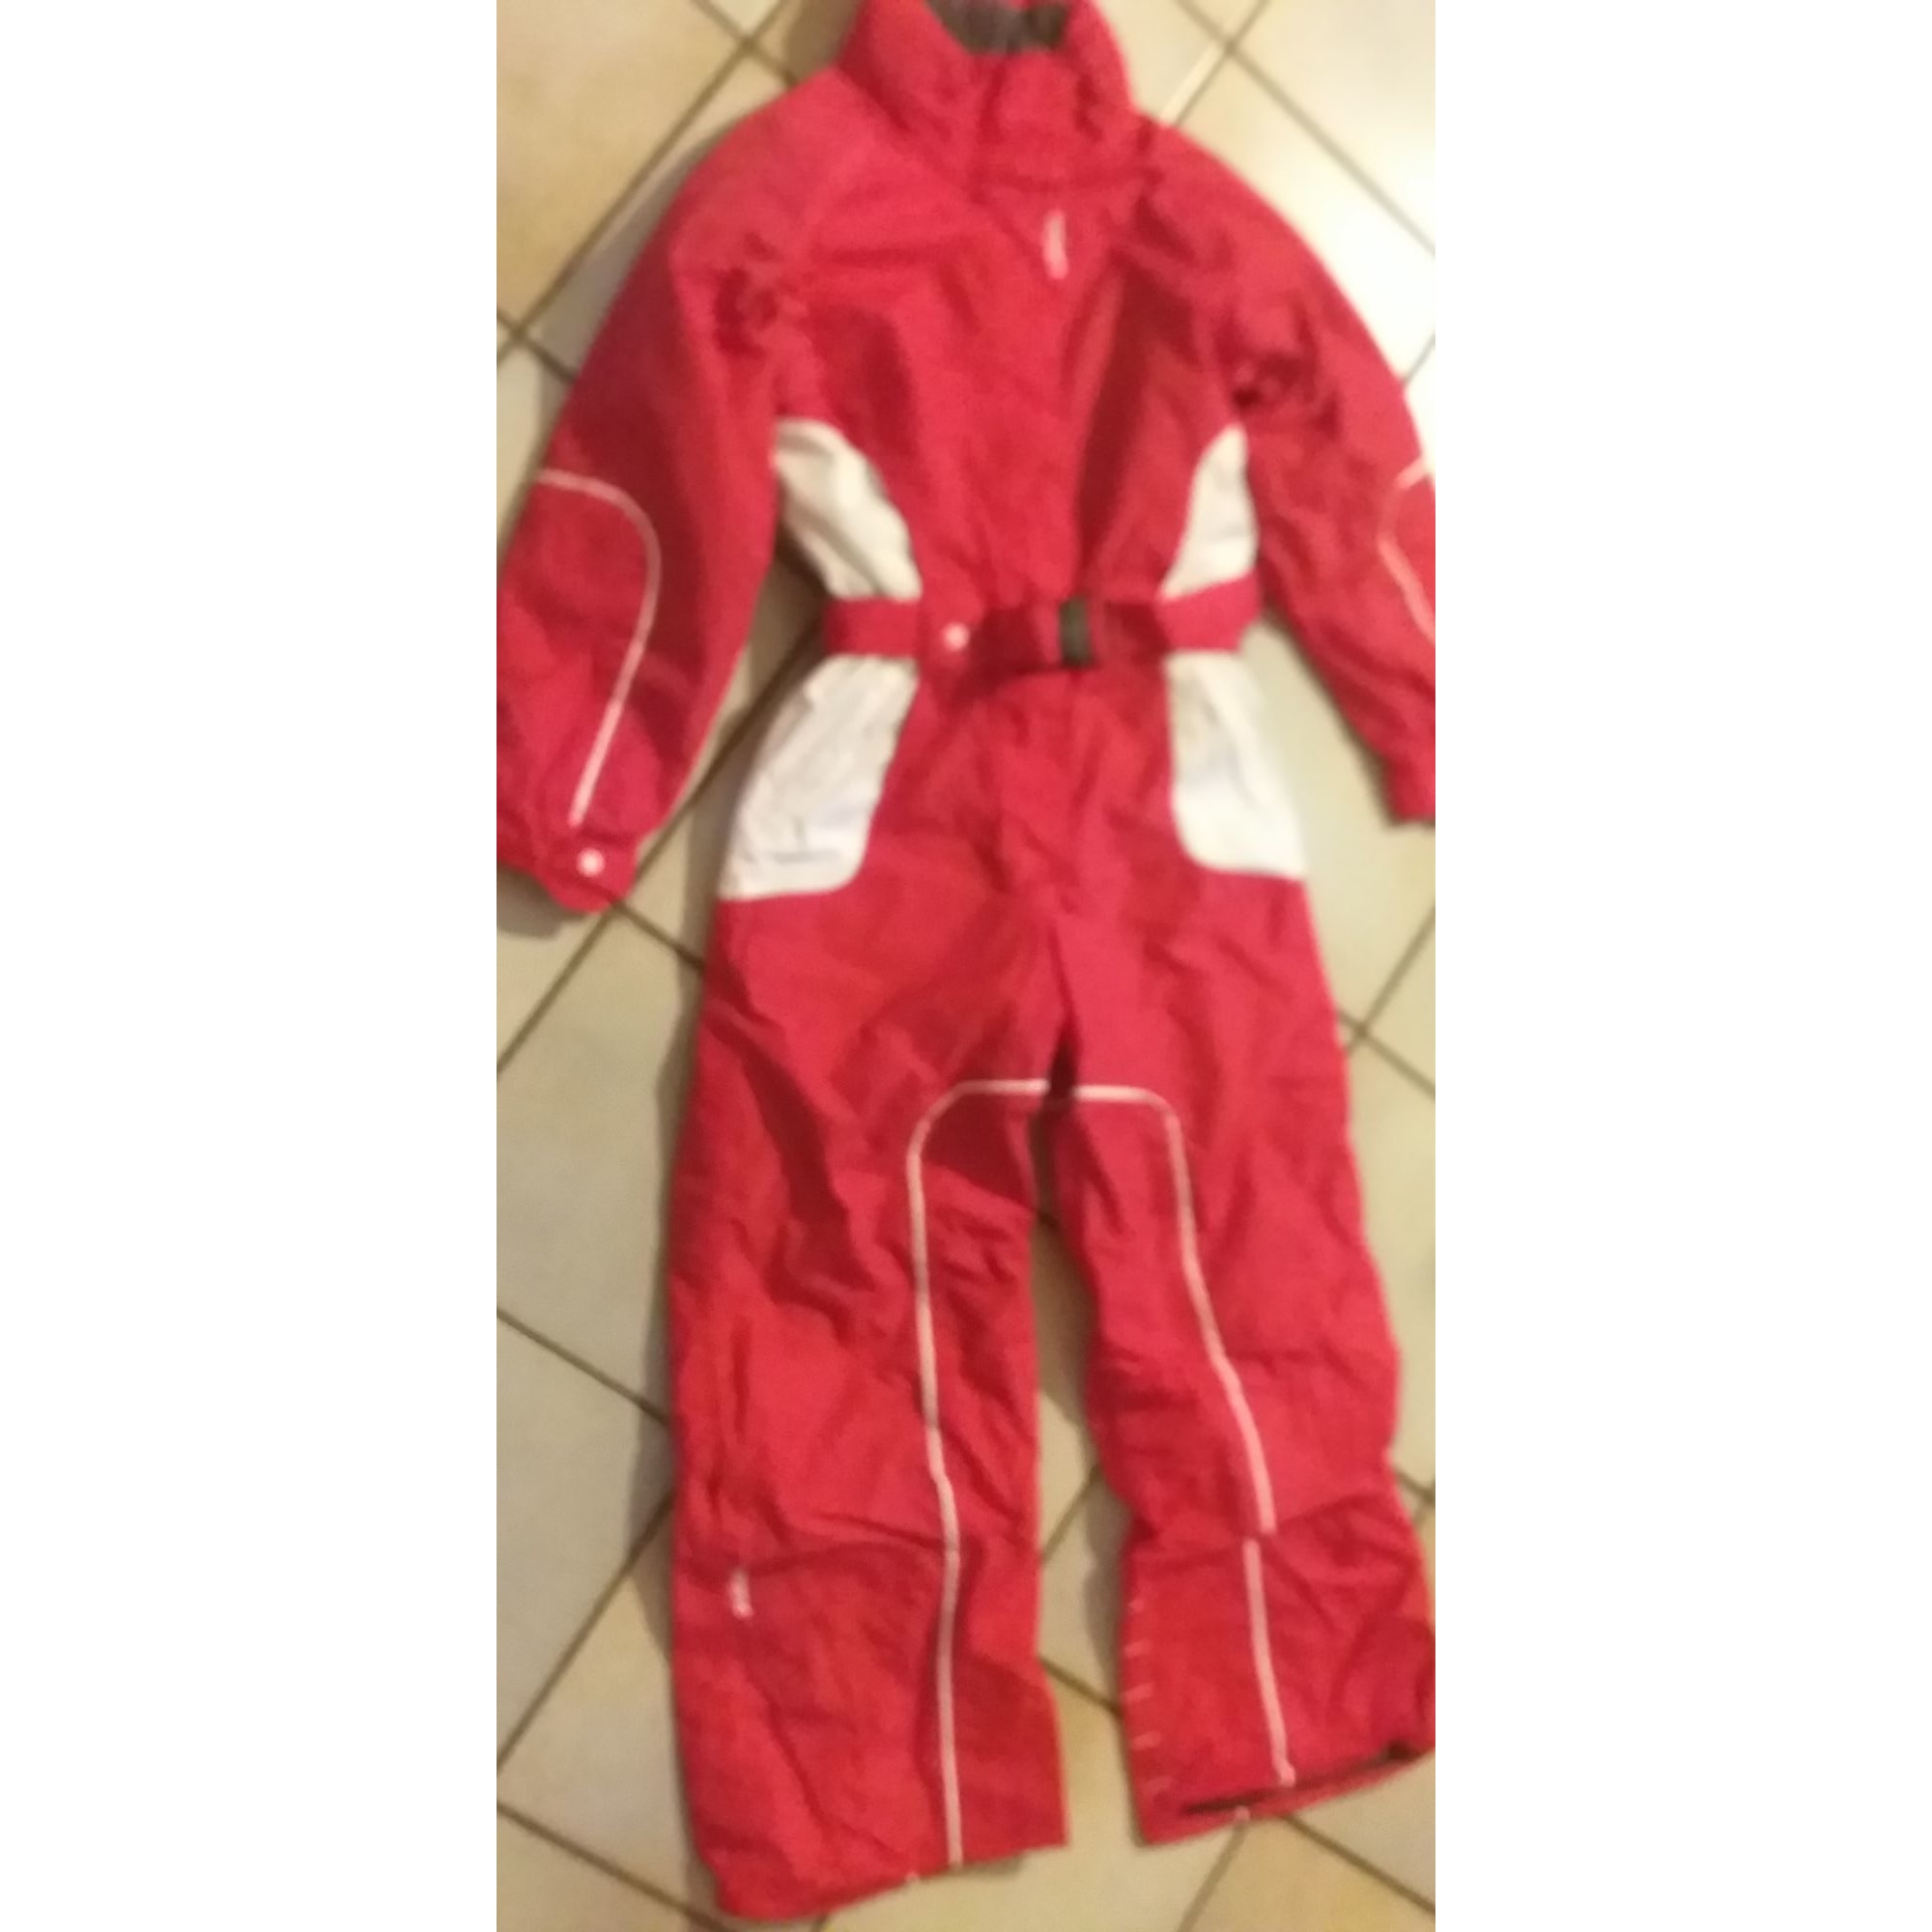 Combinaison Ski Enfant 4-5 Ans Décathlon Wedze Pull'n Fit Vinted | canbro.in